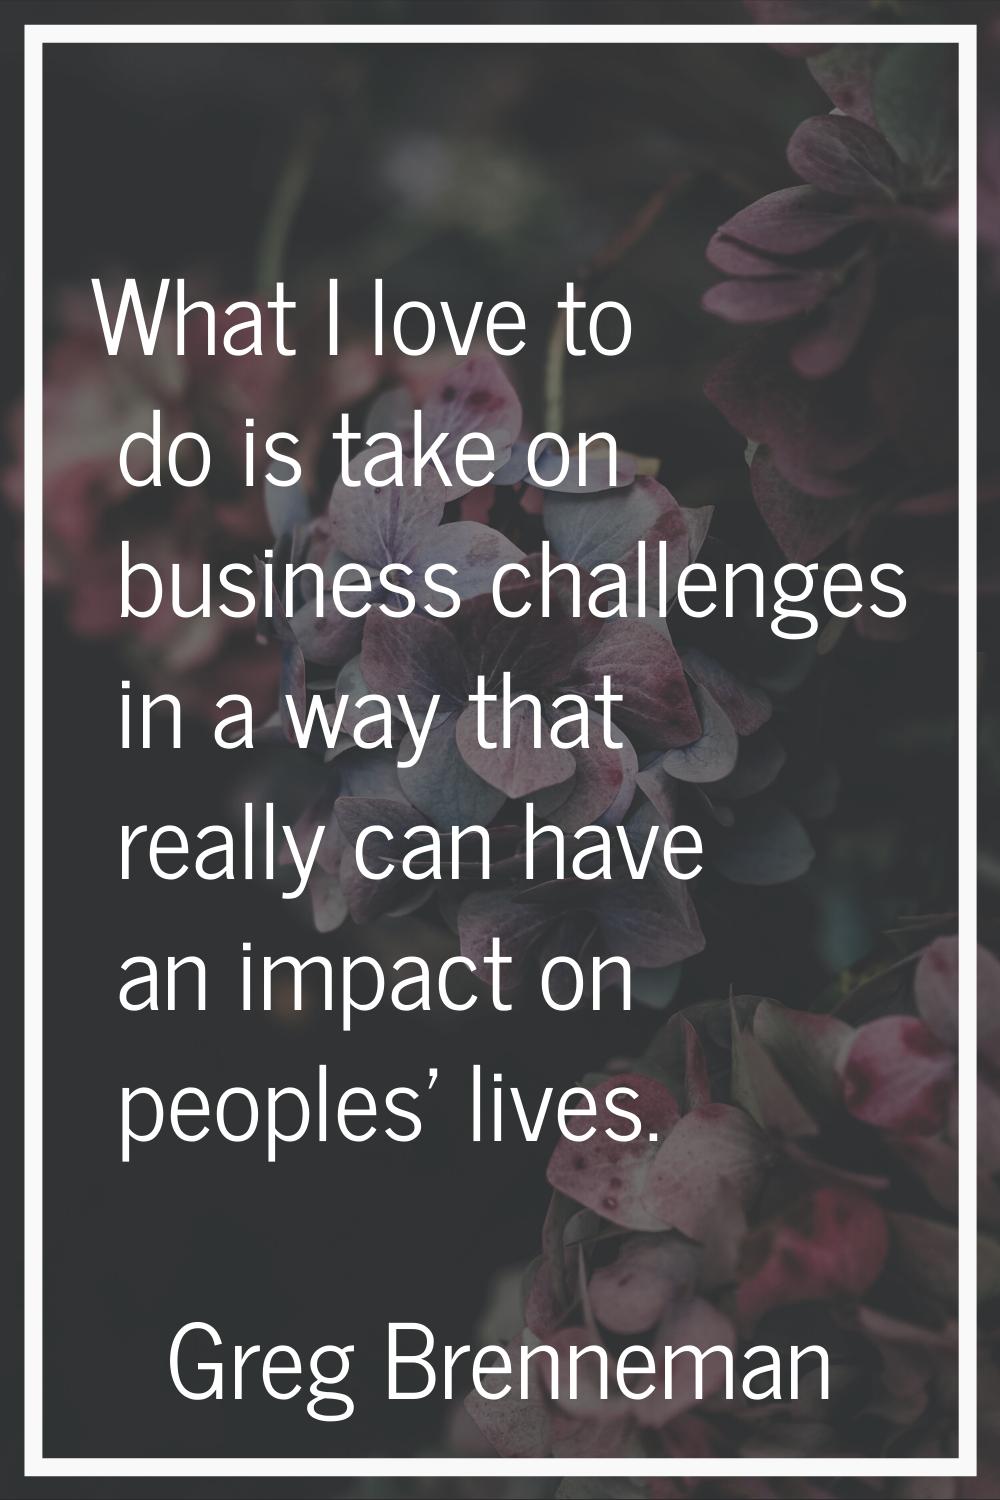 What I love to do is take on business challenges in a way that really can have an impact on peoples